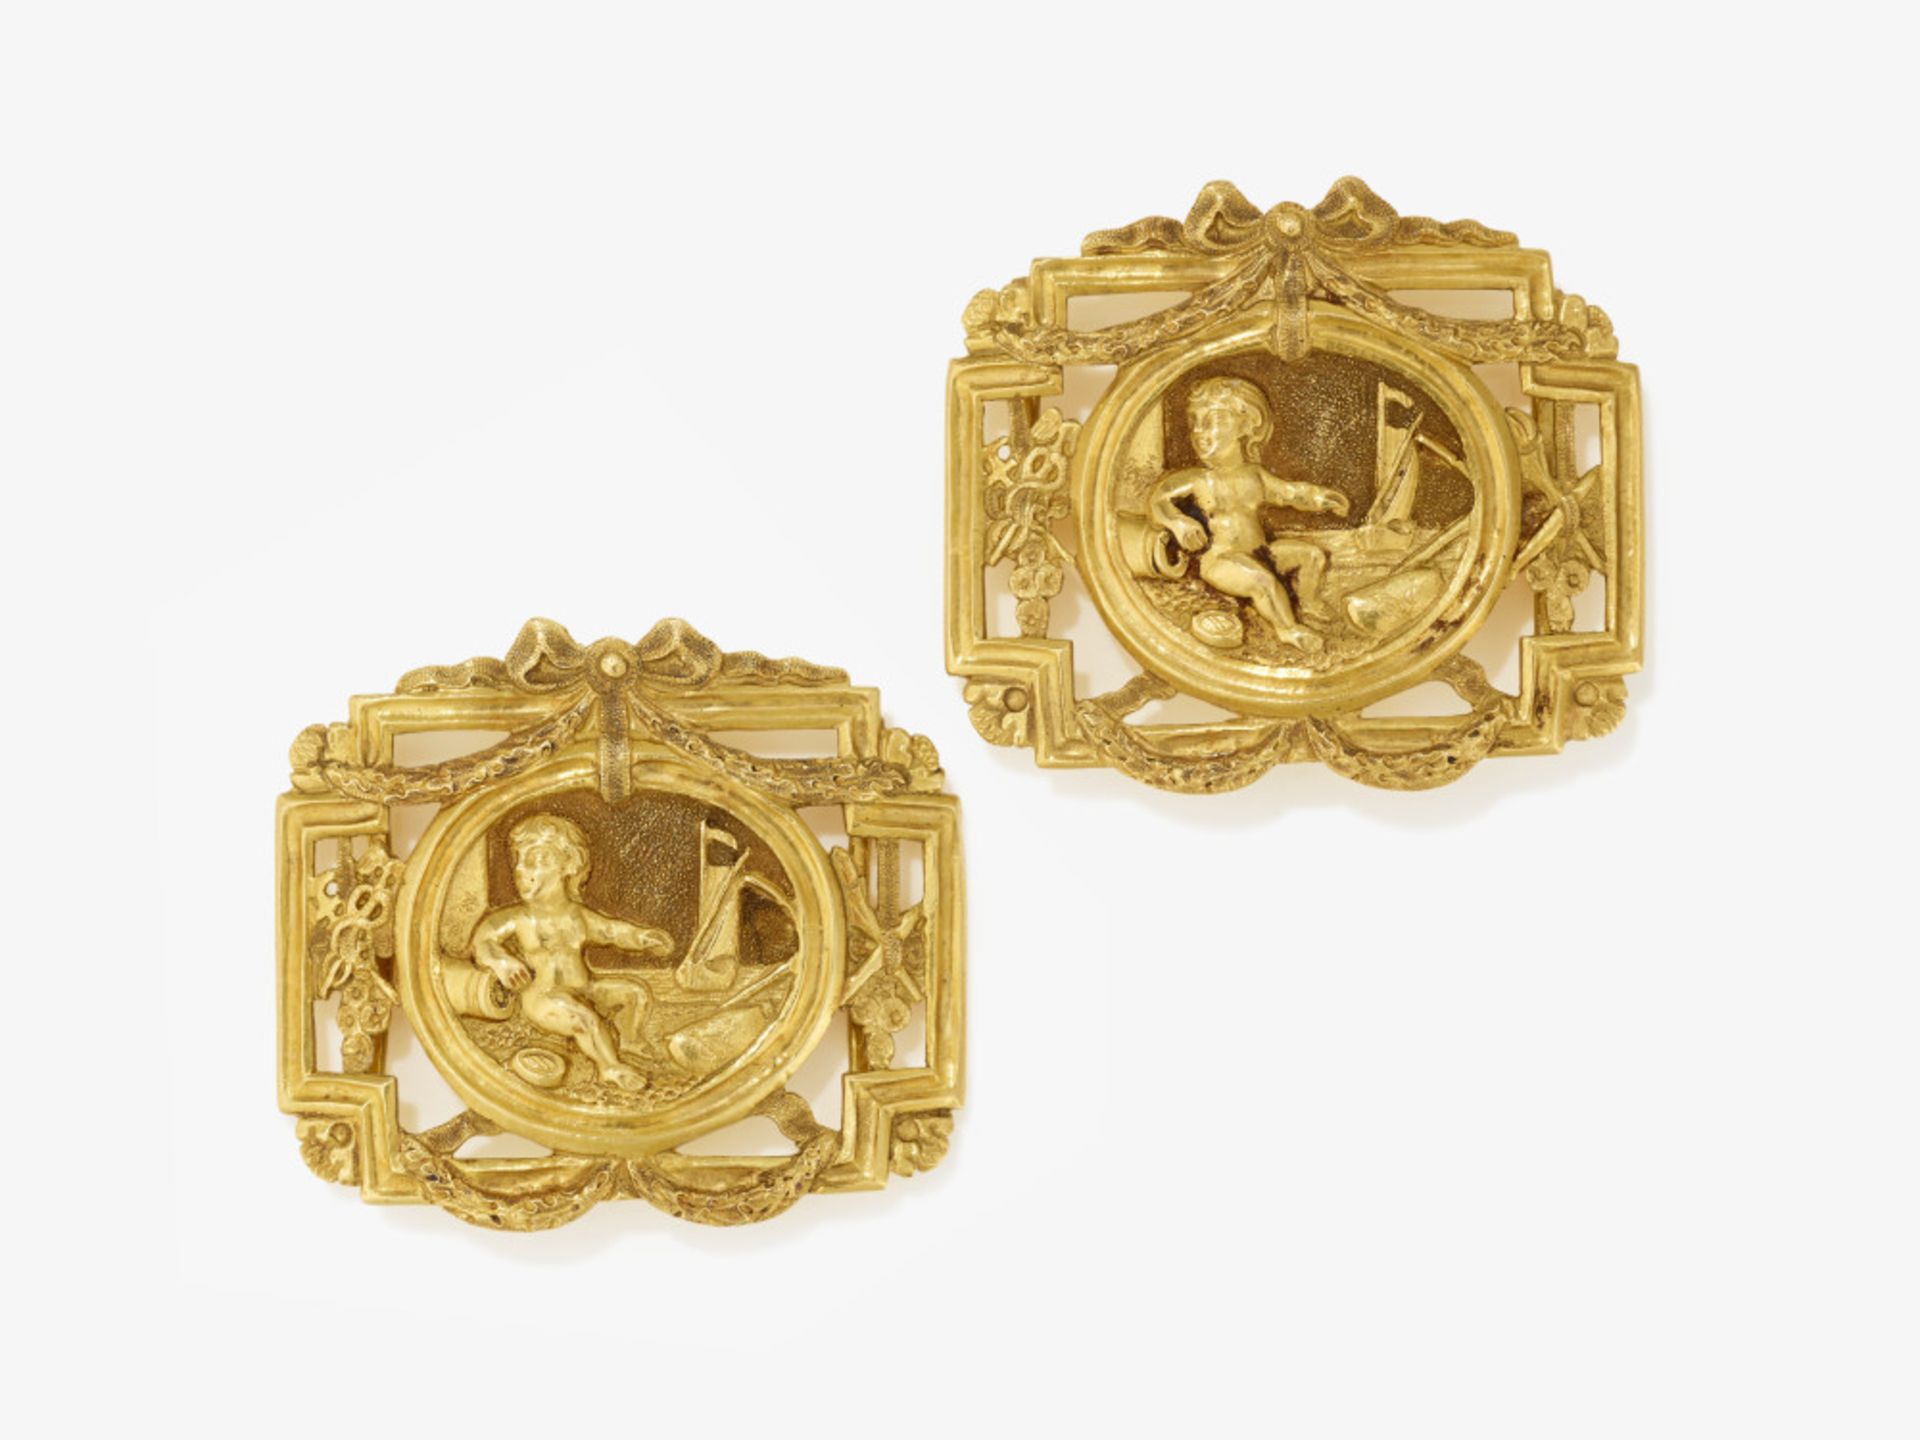 A pair of shoe buckles - Probably France, circa 1780